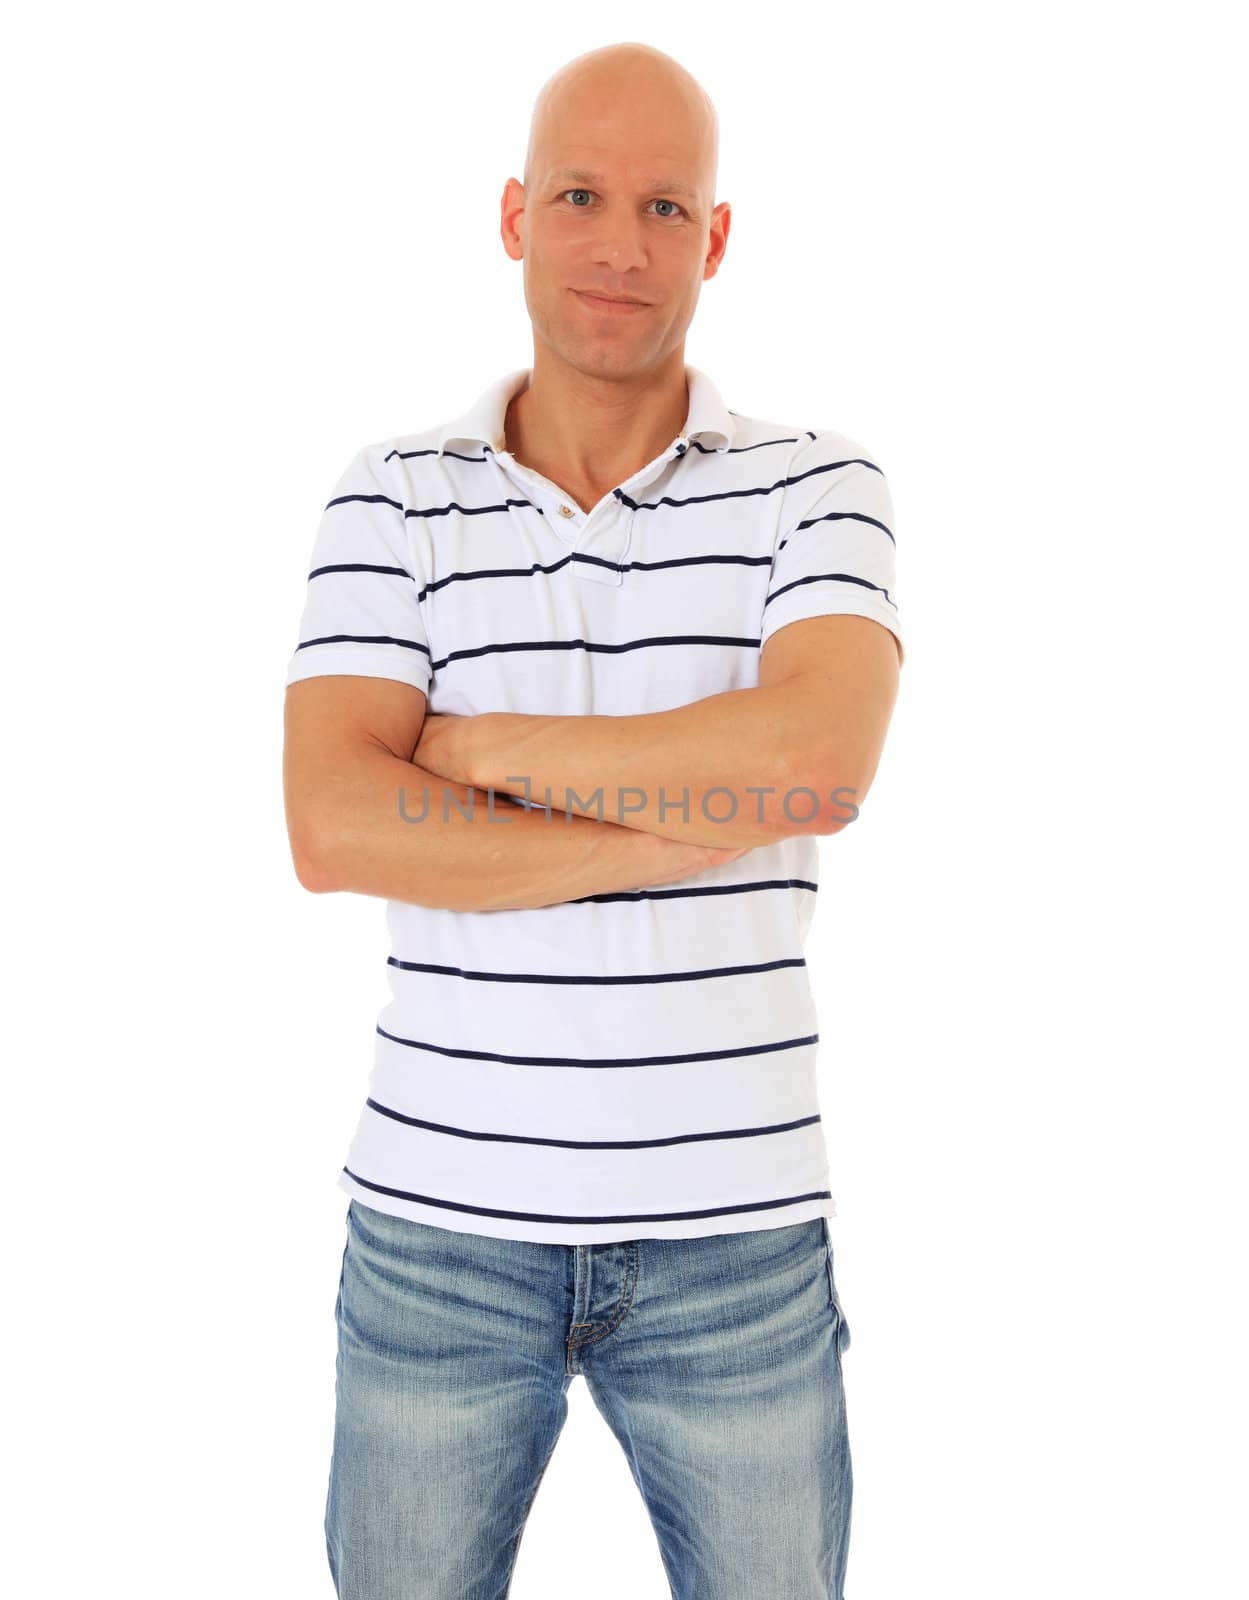 Serious looking man. All on white background.